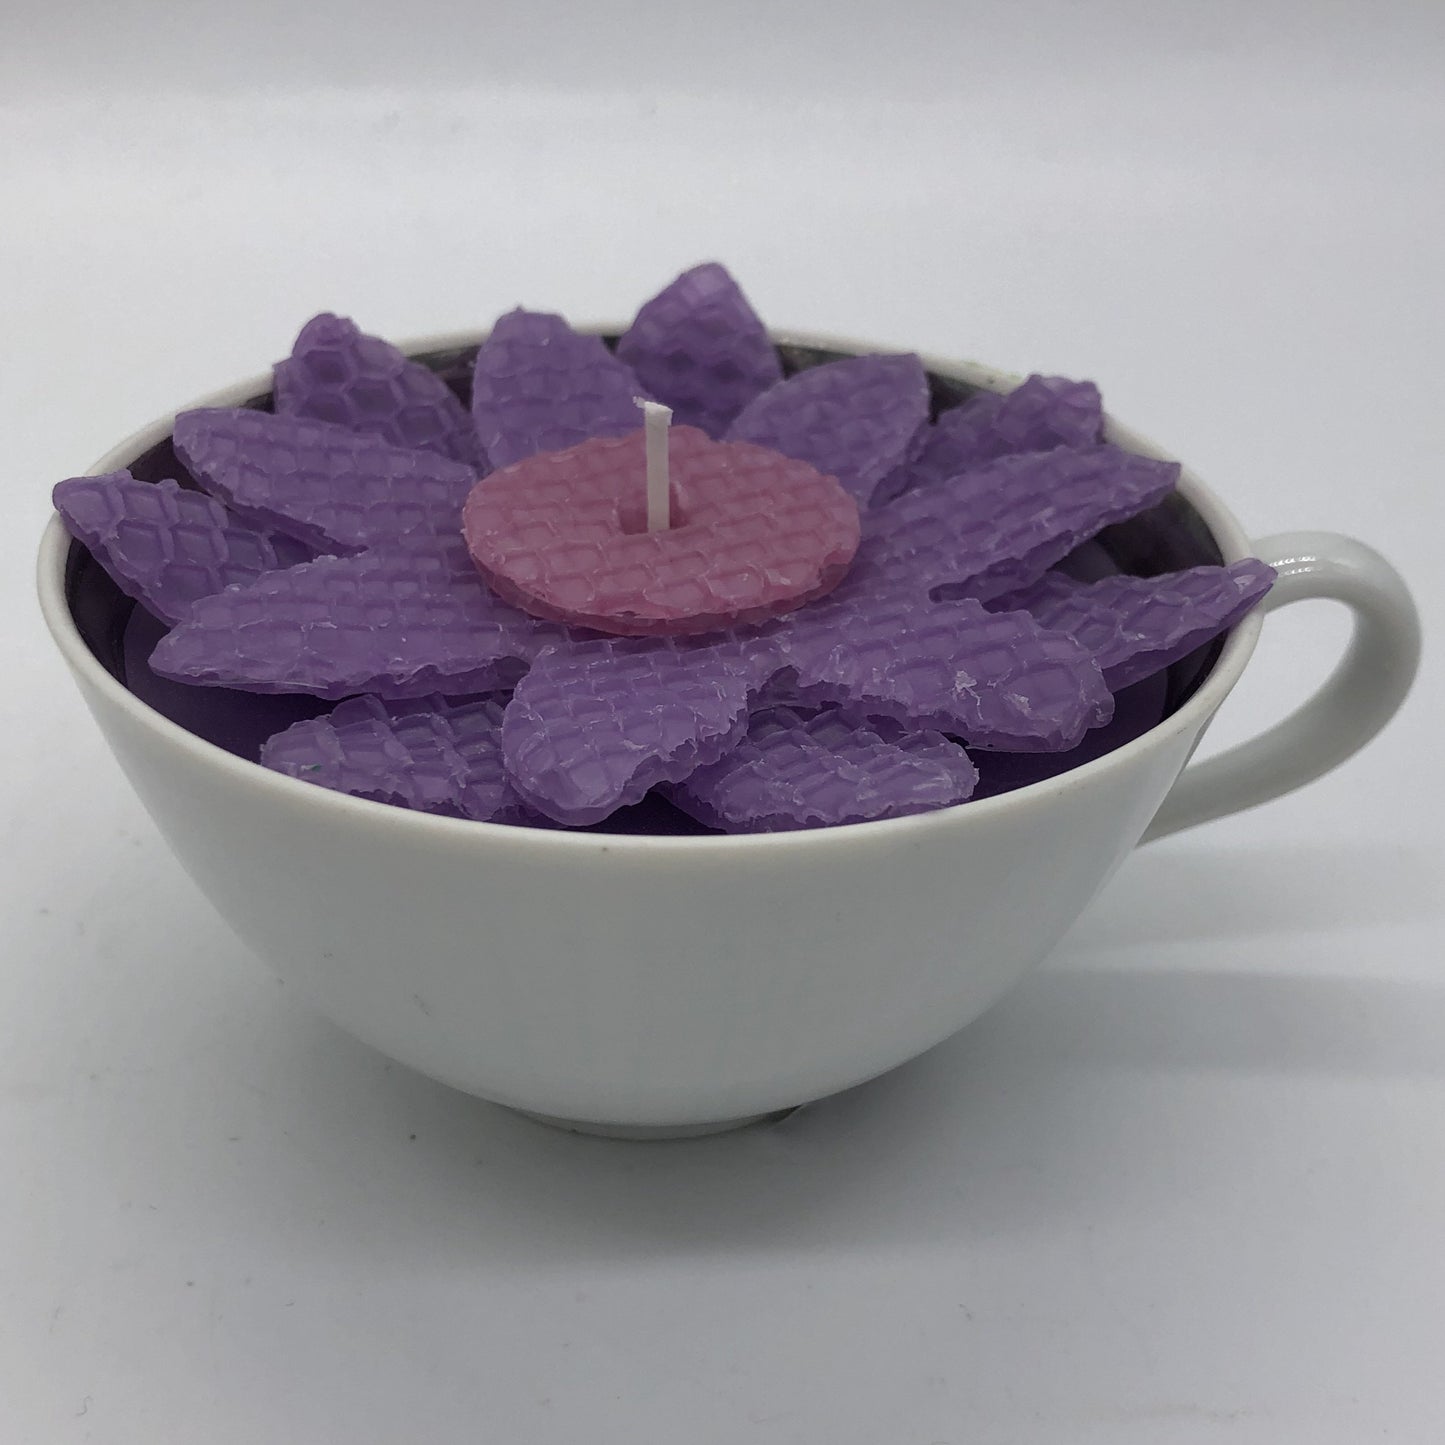 White teacup filled with candle and purple and pink daisy made from beeswax sheet on top.